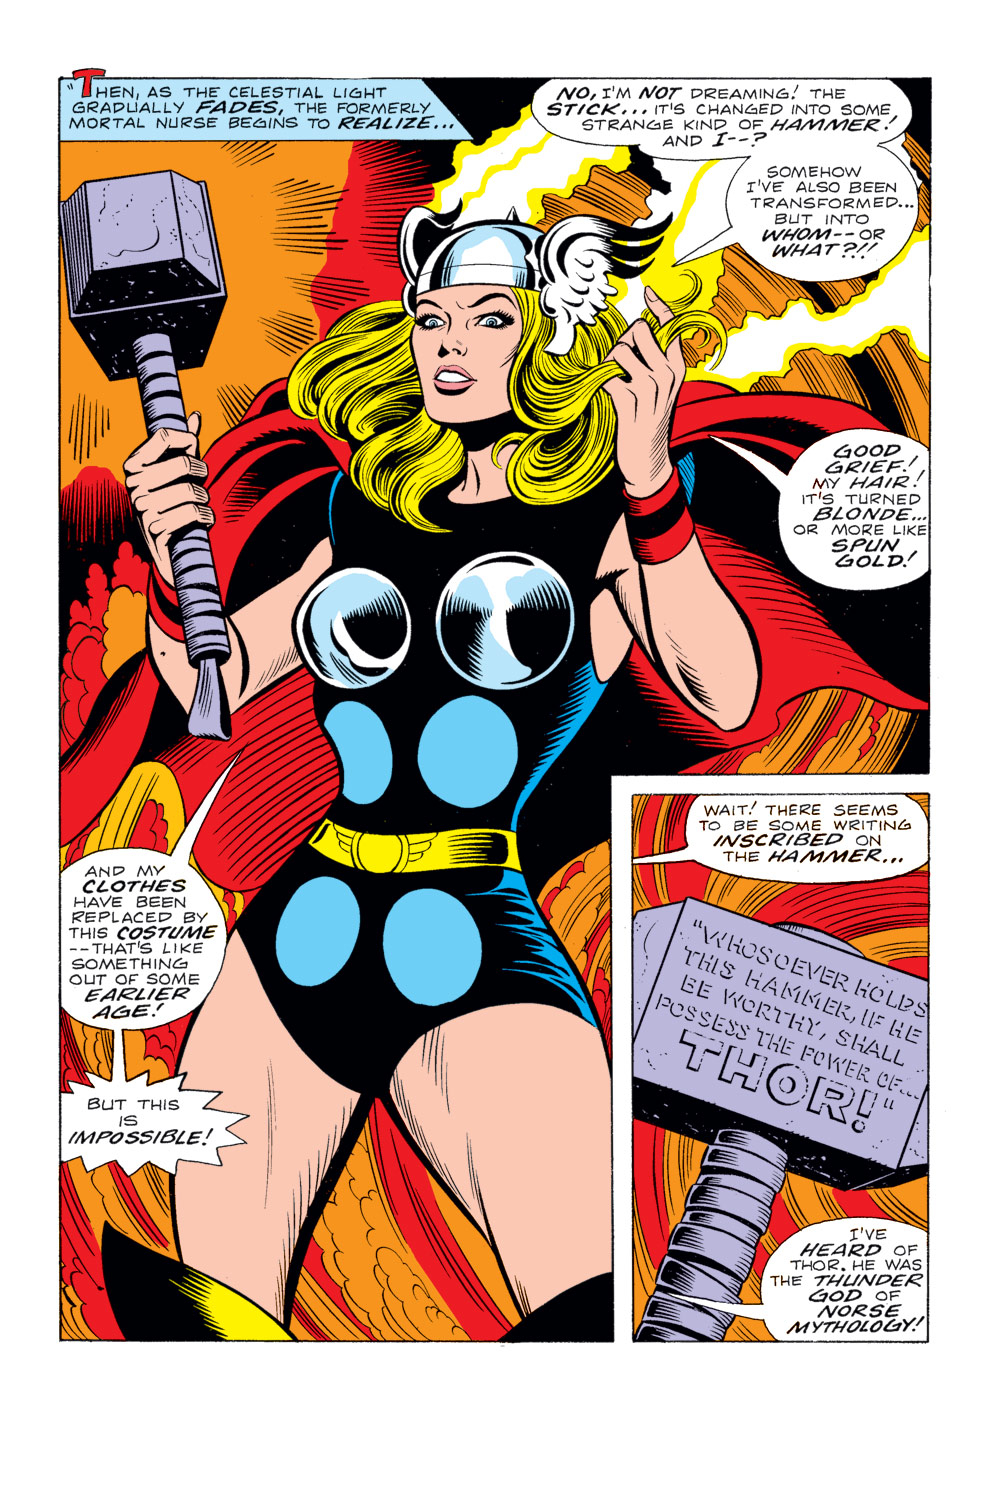 What If? (1977) issue 10 - Jane Foster had found the hammer of Thor - Page 9